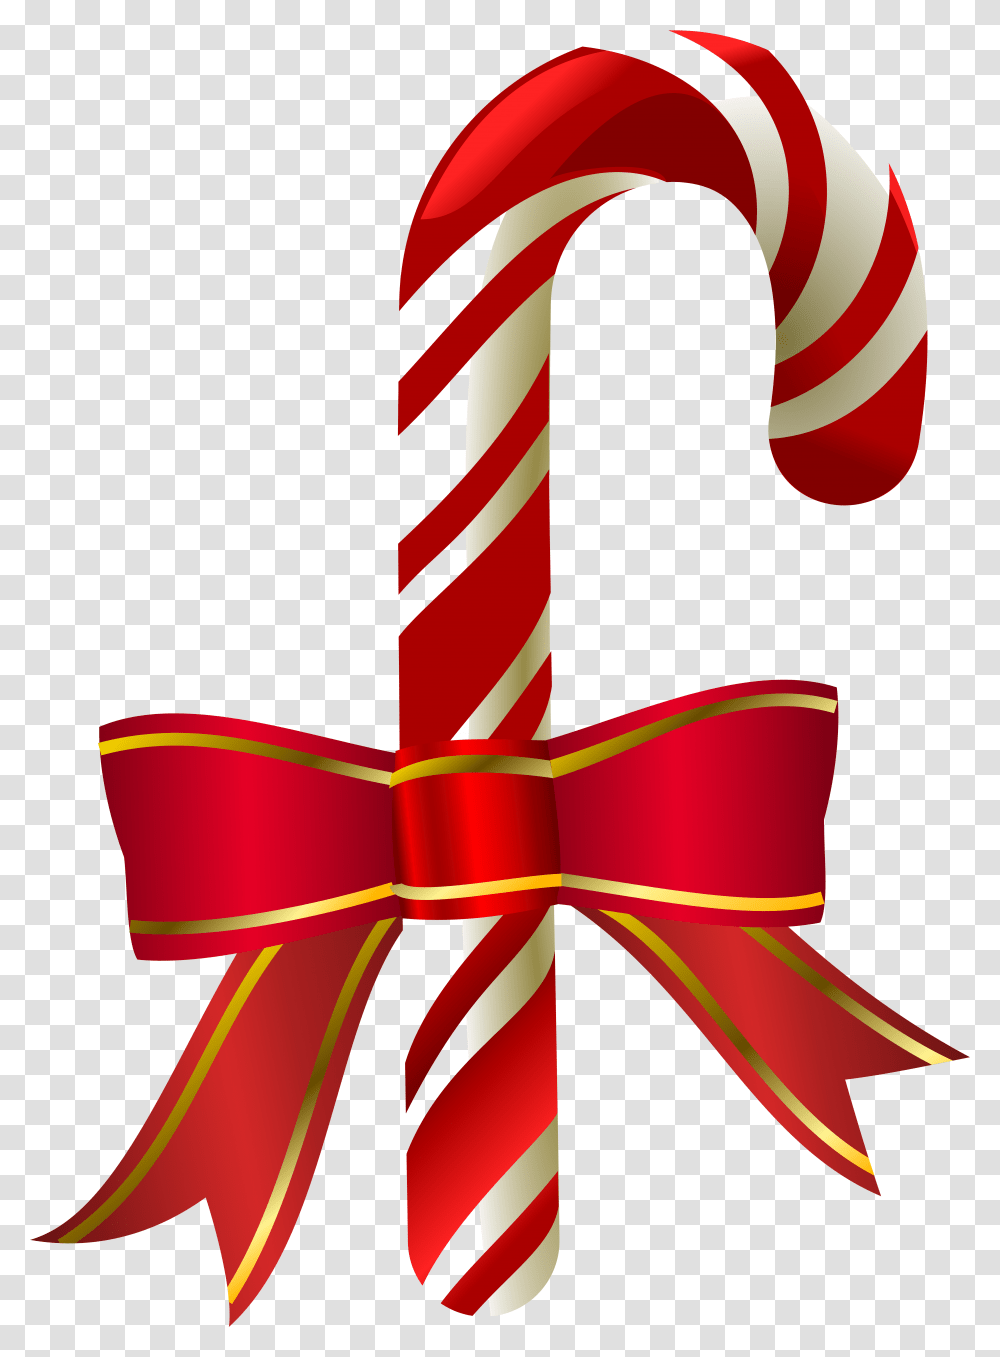 Candy Cane Collection Of Candycane Clipart Free Best Christmas Candy Cane Transparent Png